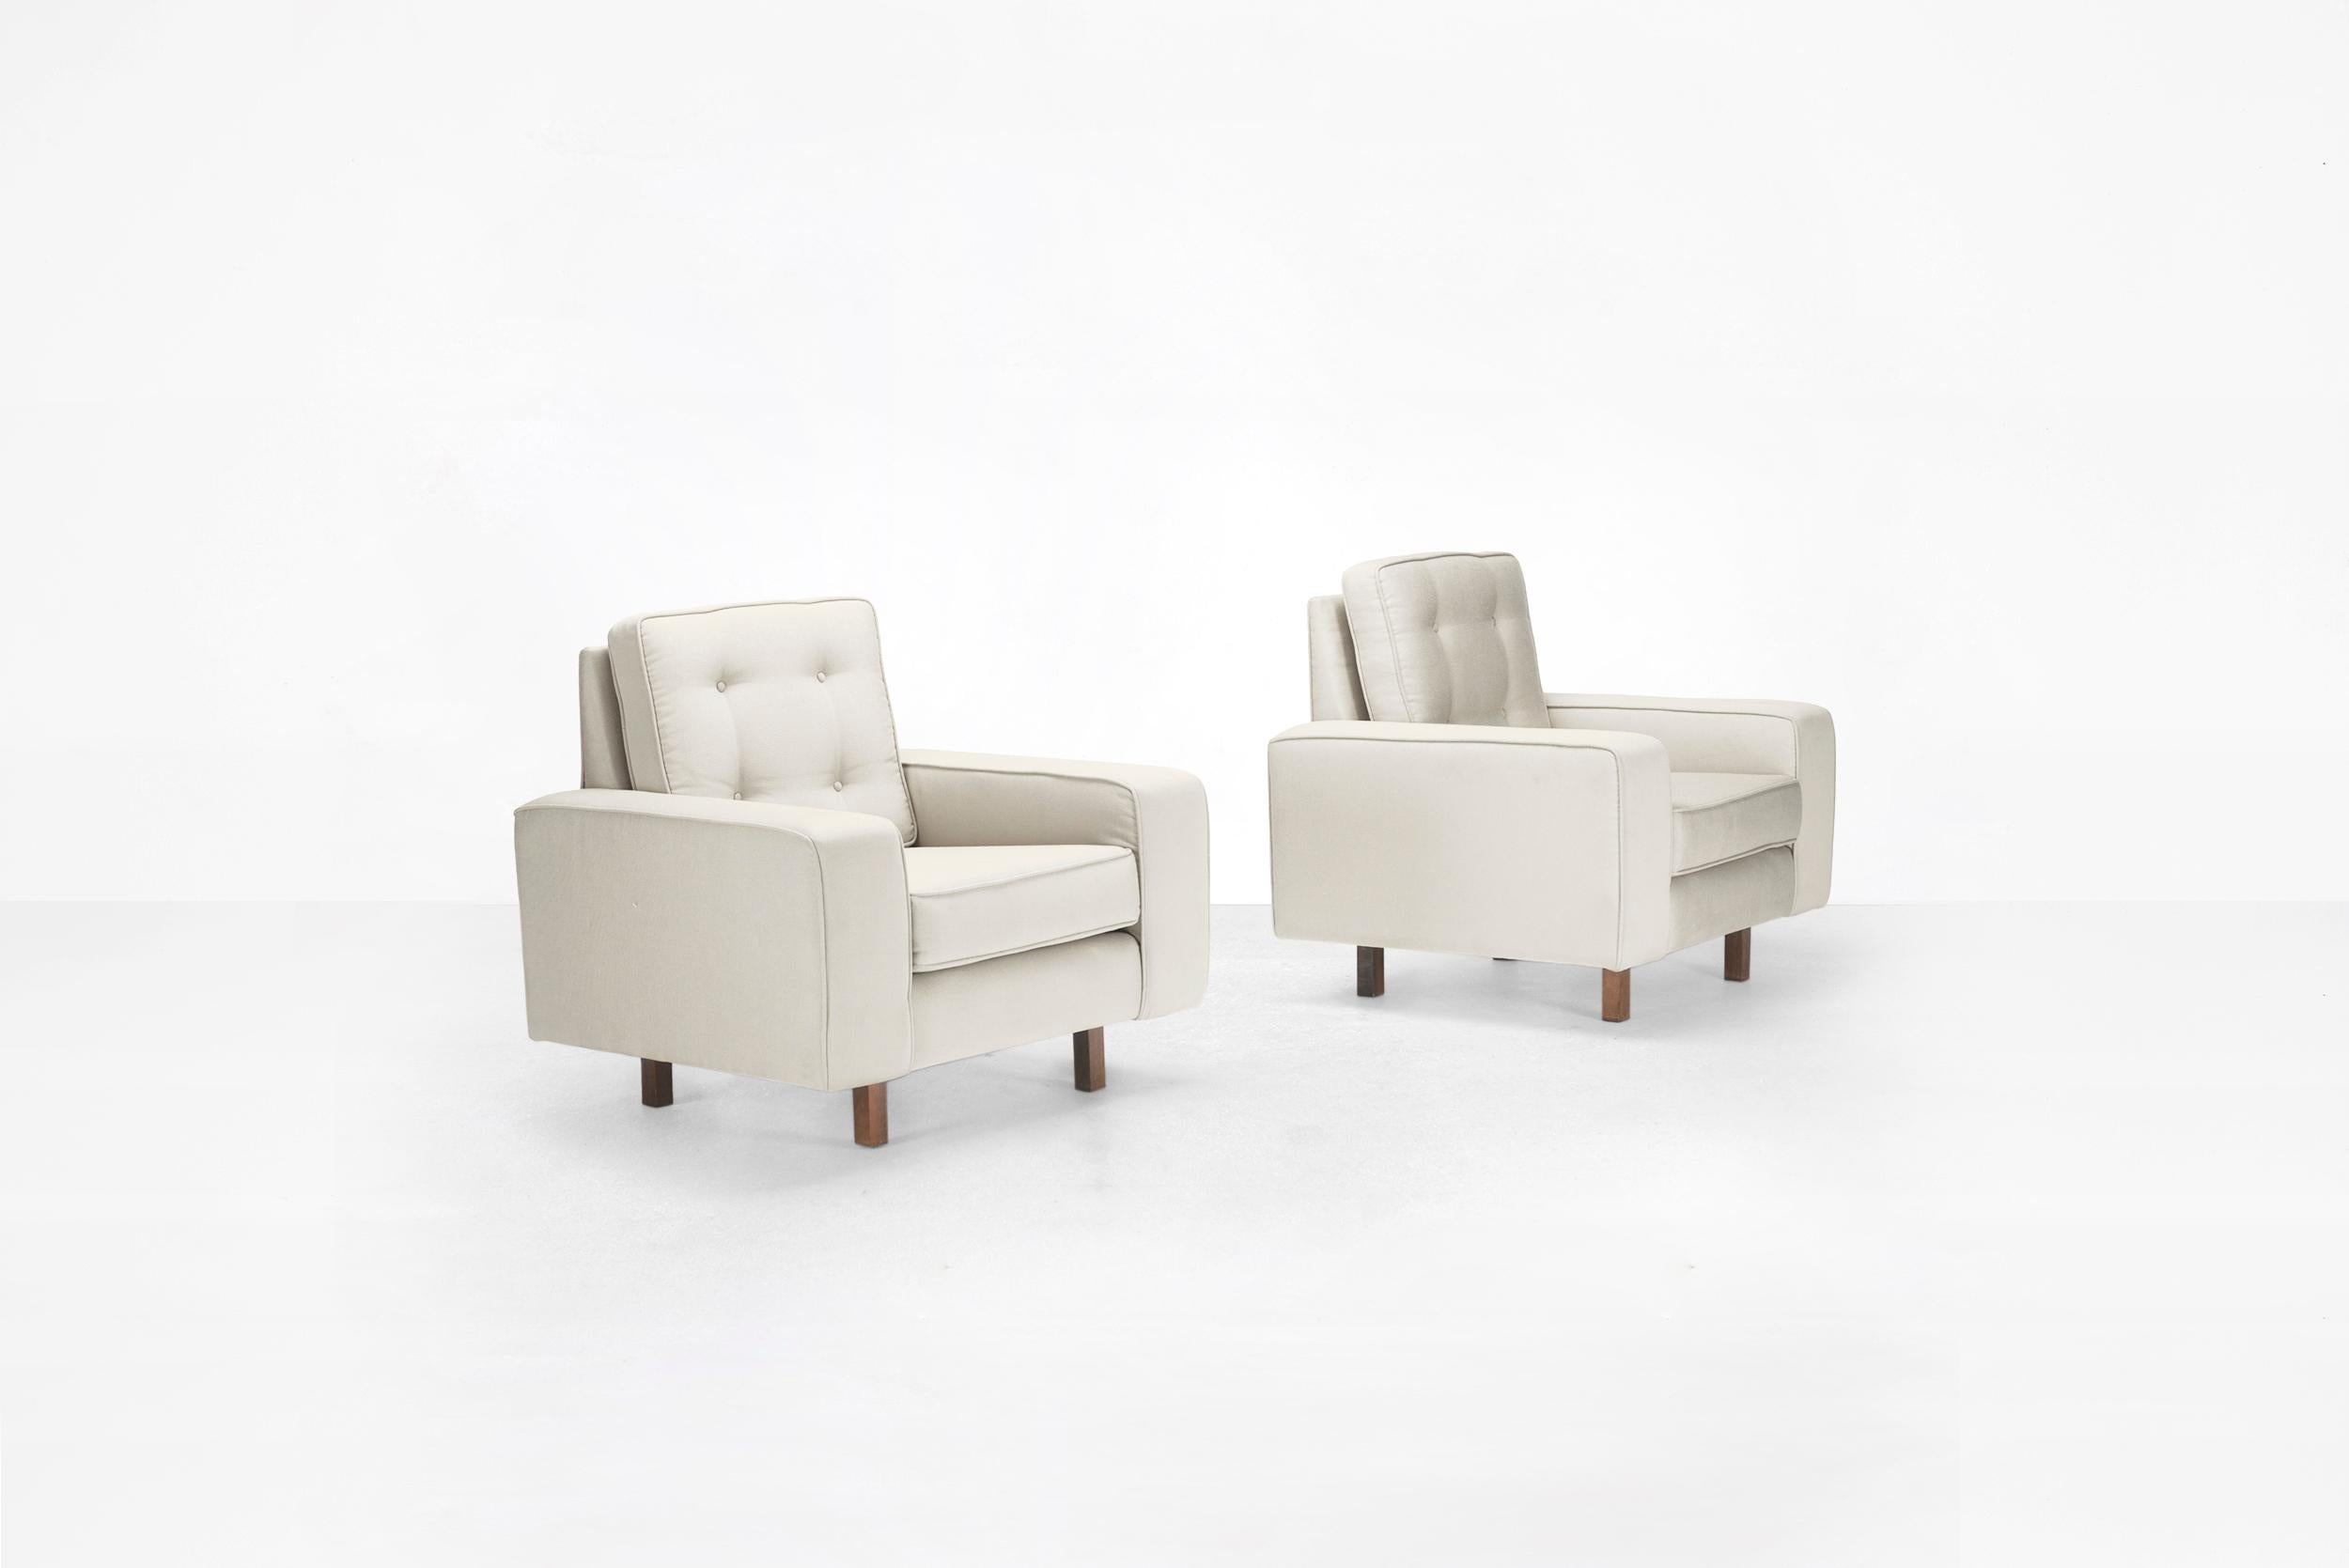 Joaquim Tenreiro 
Pair of armchairs
Manufactured by Tenreiro Moveis e Decoraçaos
Brasil, 1954
Cabreuba, upholstery
From the archives of Side Gallery, Barcelona 

Measurements
86 cm x 76 cm x 83 H cm
34 in x 30 in x 32.5 H